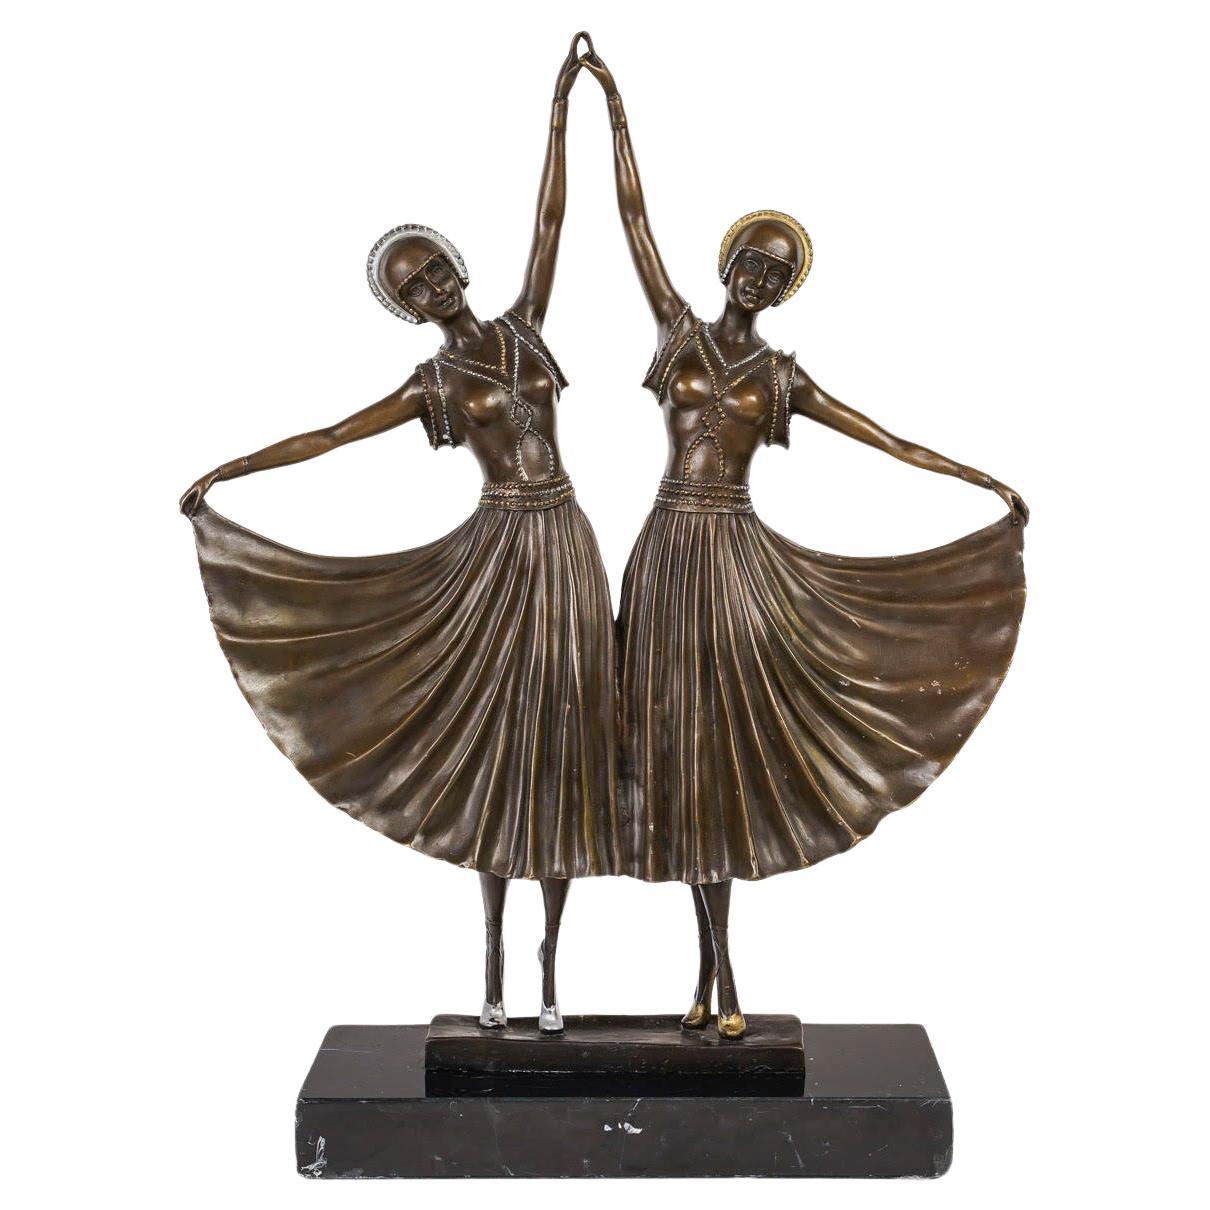 Sculpture, the Dancers in the Art Deco Style, 20th Century.